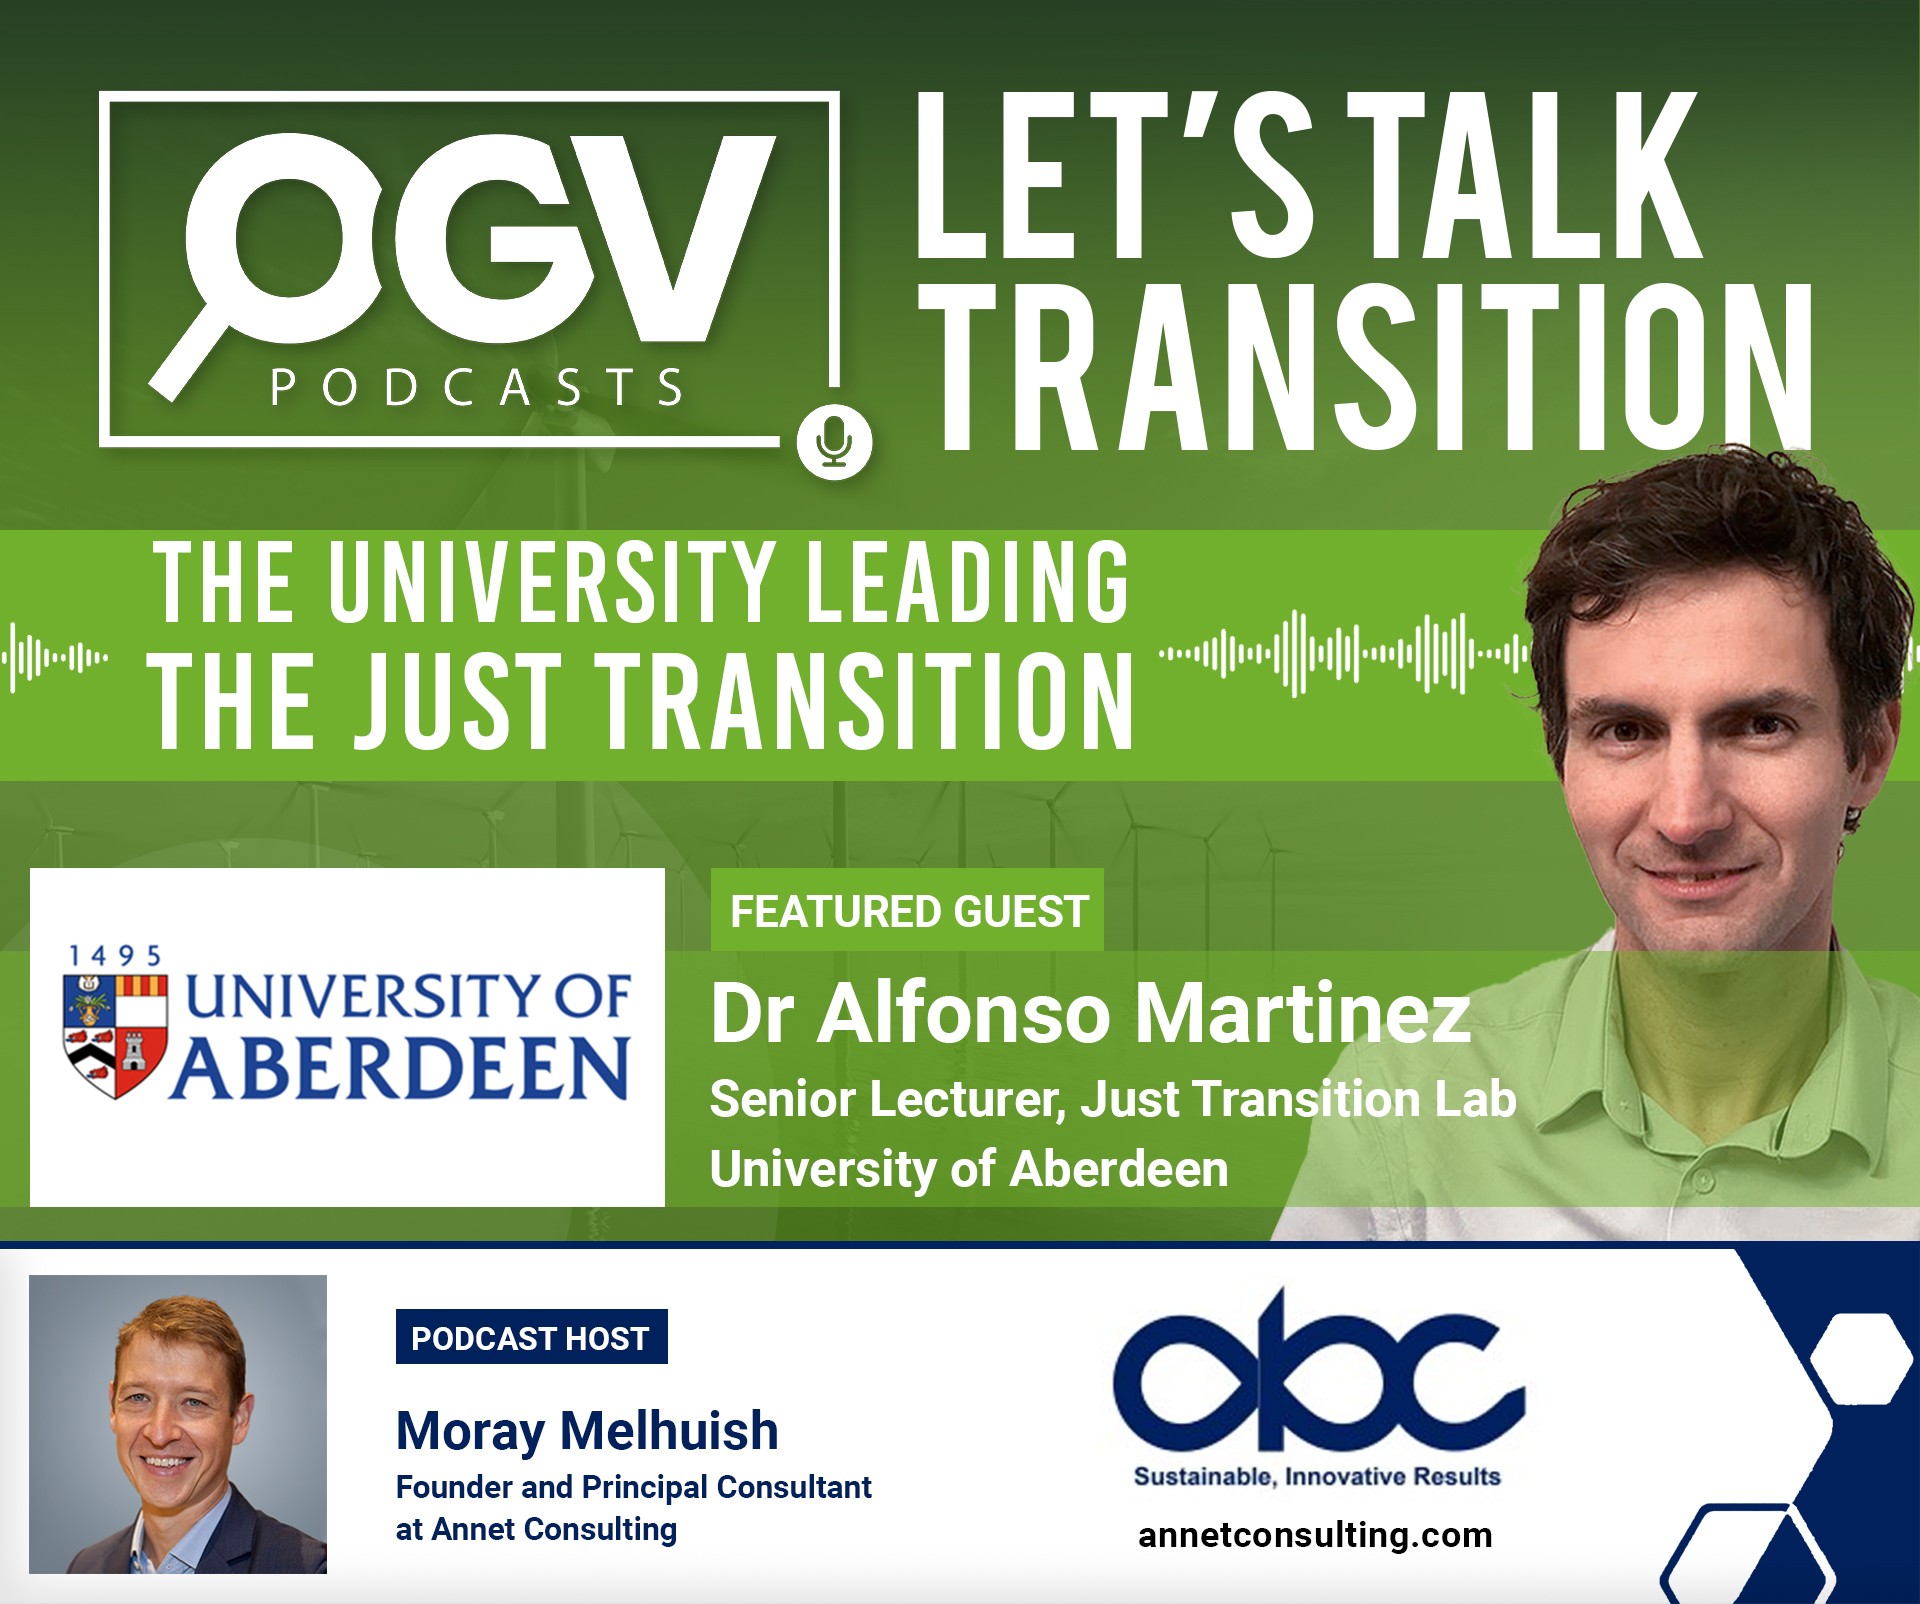 The University Leading the Just Transition